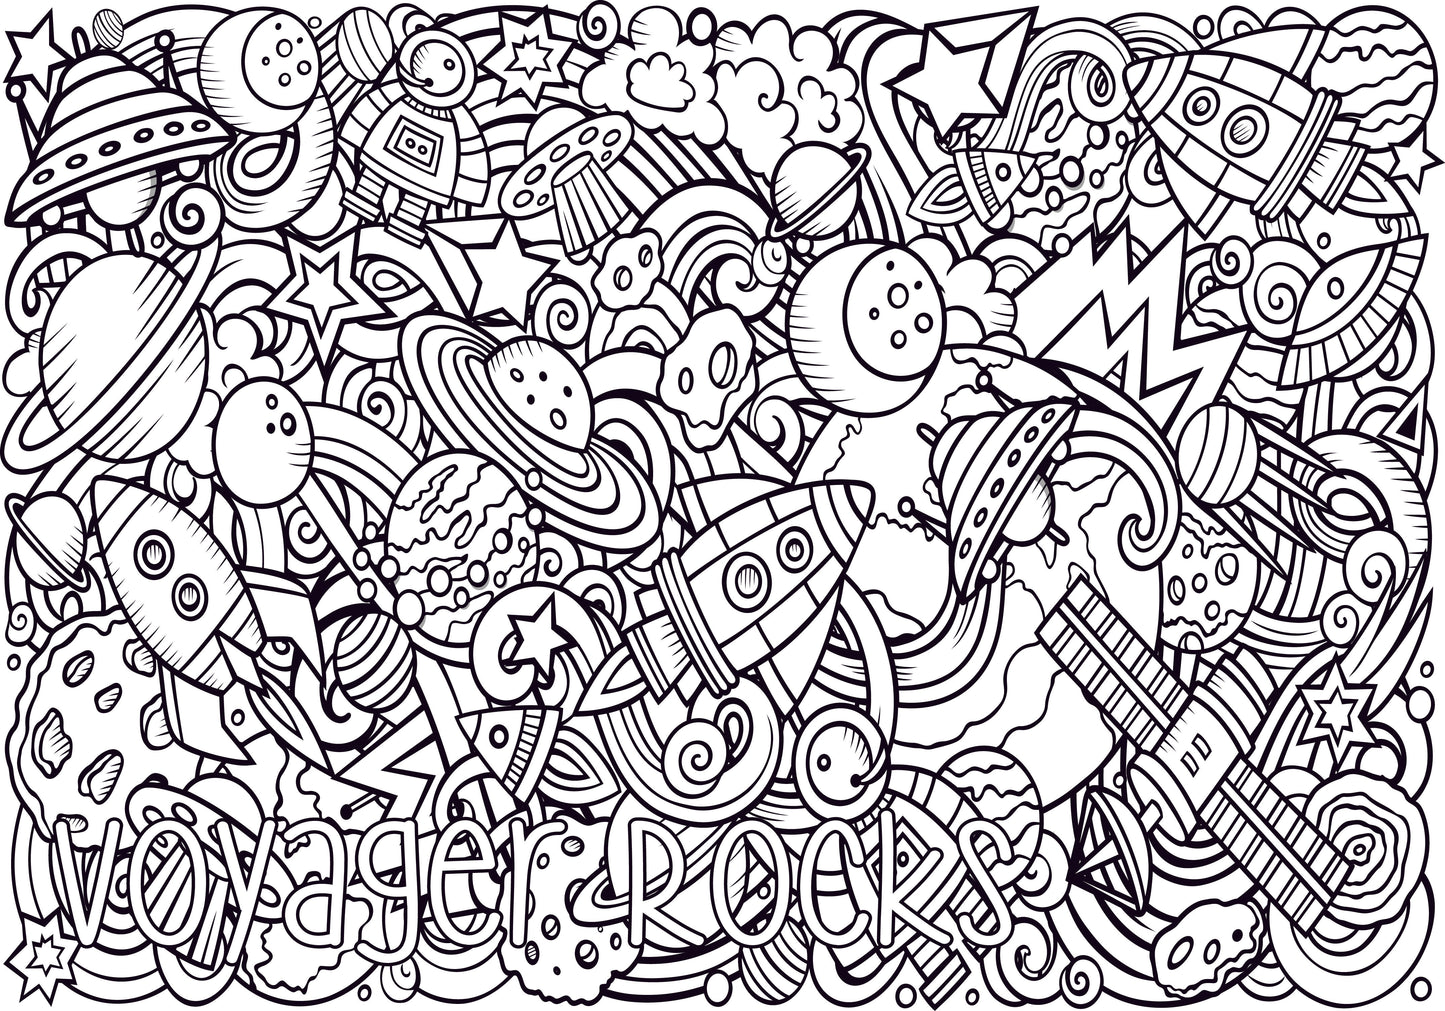 Premium Giant Space Coloring Poster